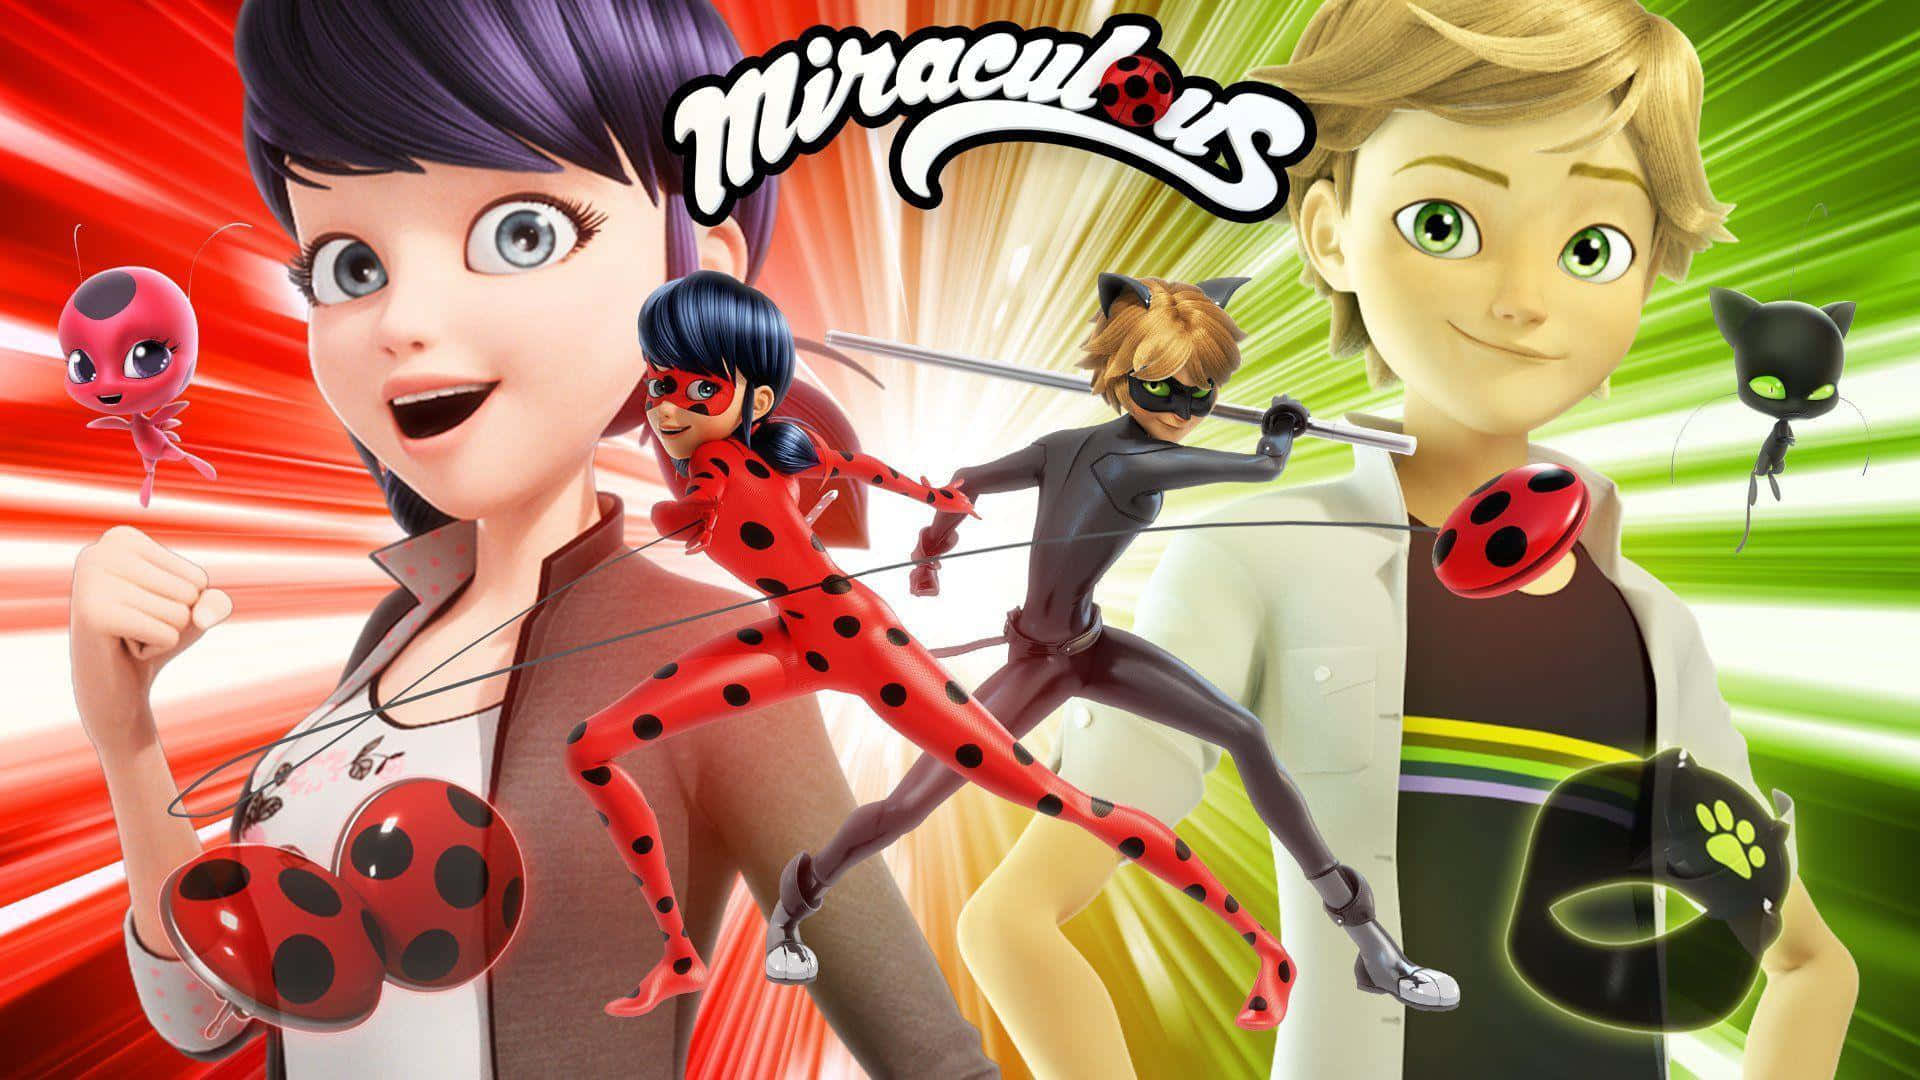 Join Marinette and Adrien in saving Paris with their Miraculous Powers!